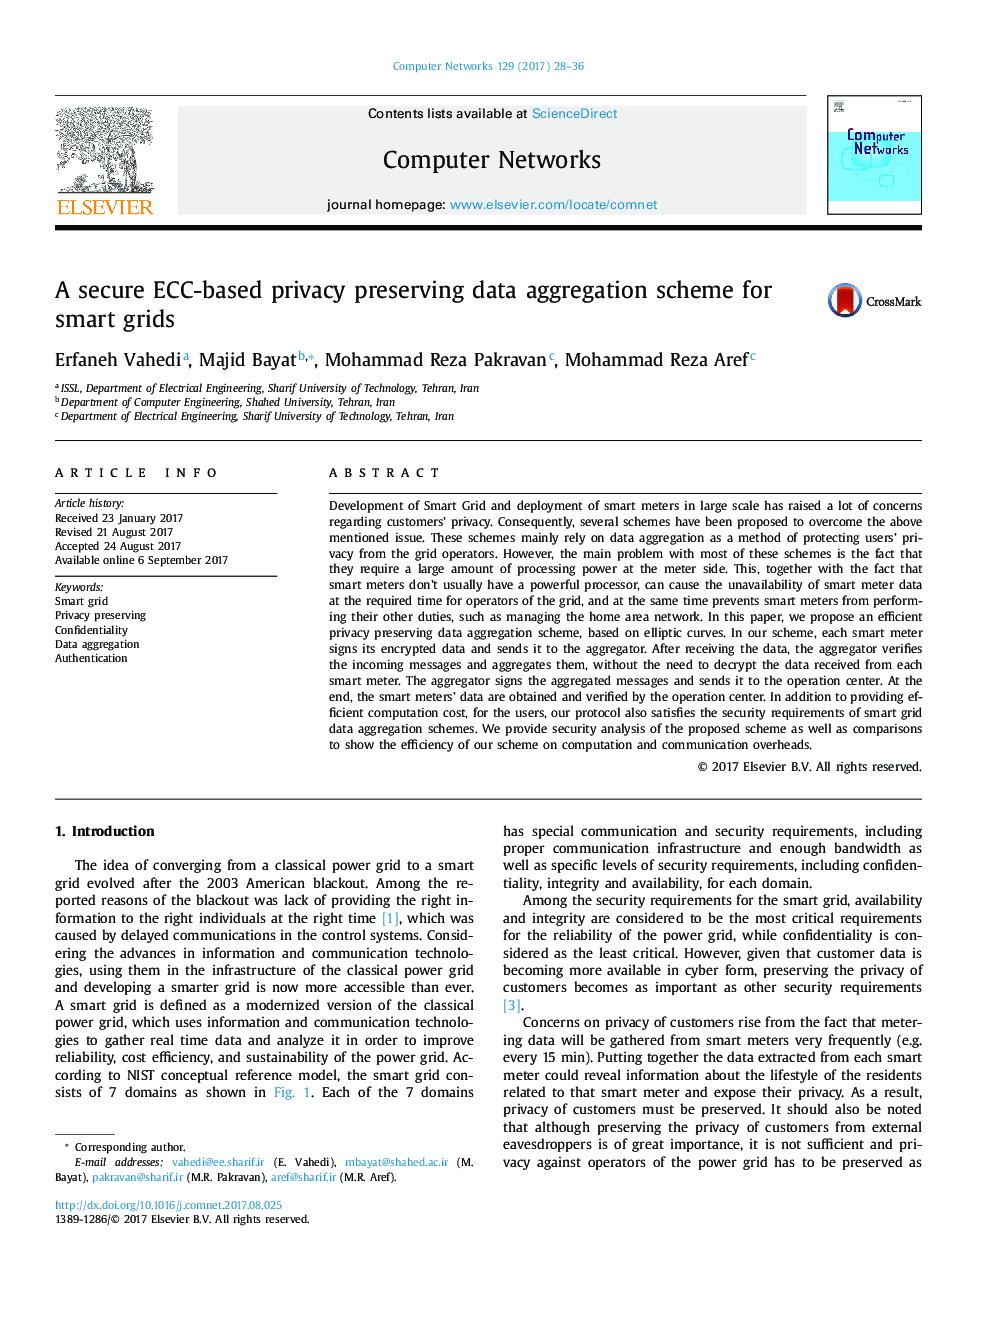 A secure ECC-based privacy preserving data aggregation scheme for smart grids